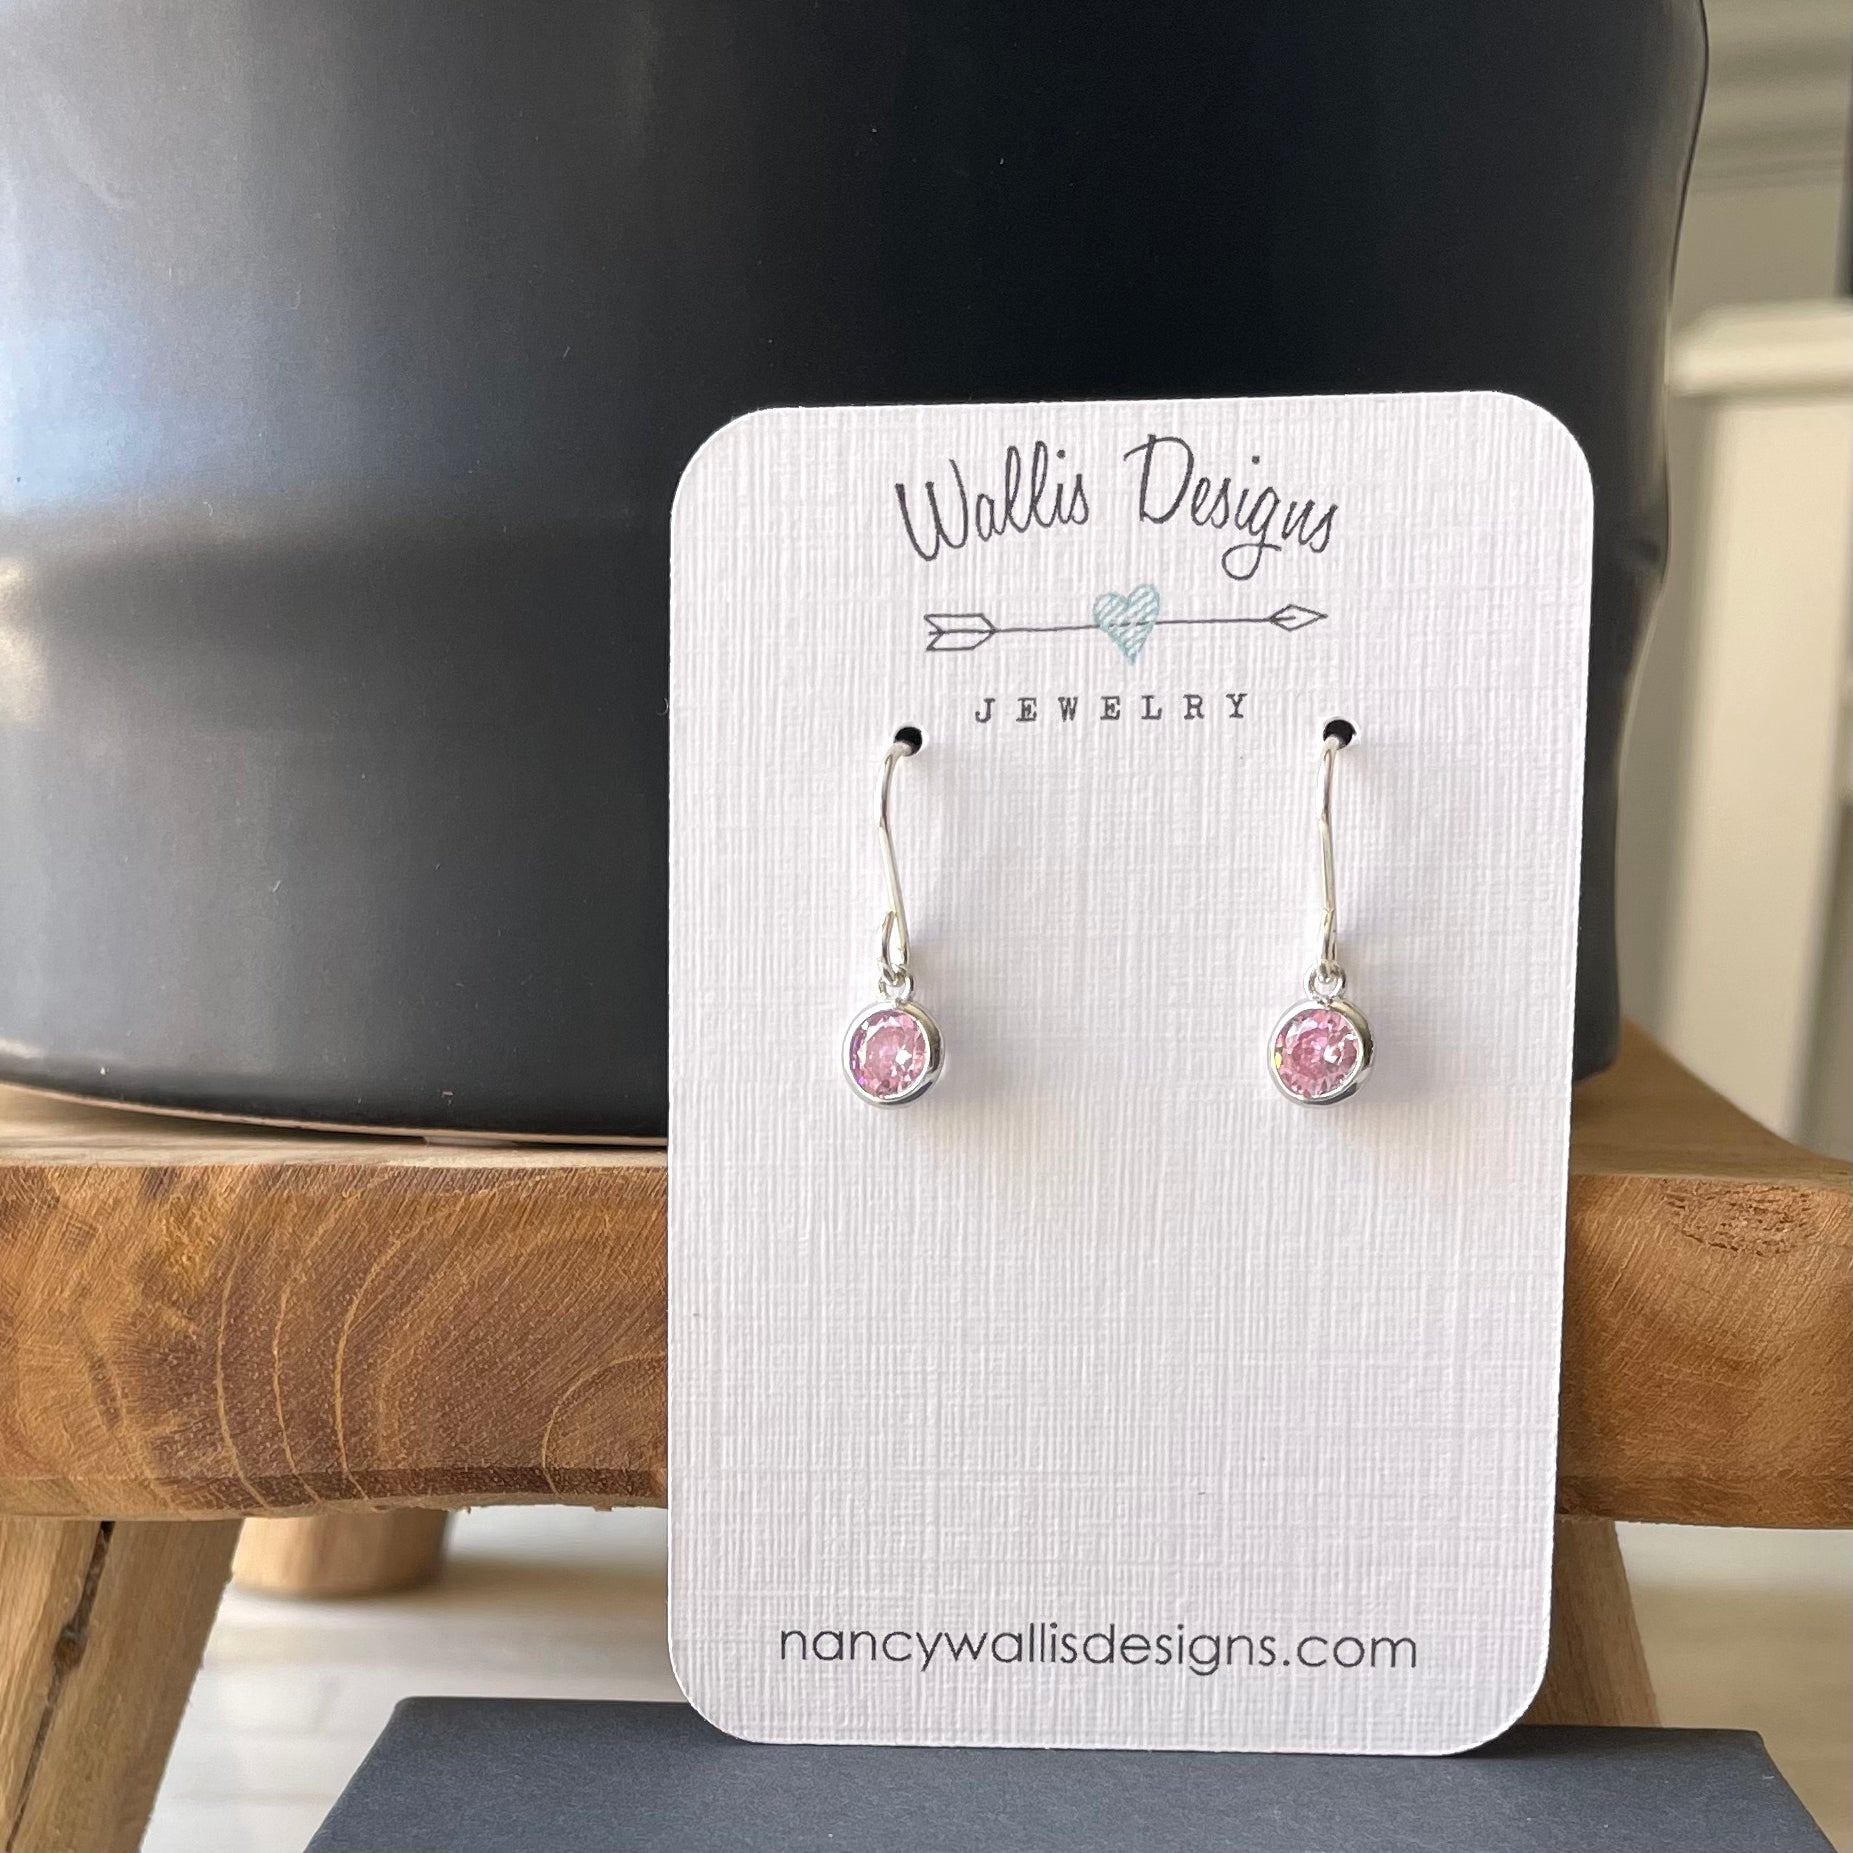 Silver and Cubic Zirconia birthstone earrings for October. Made in Canada by Nancy Wallis Designs.